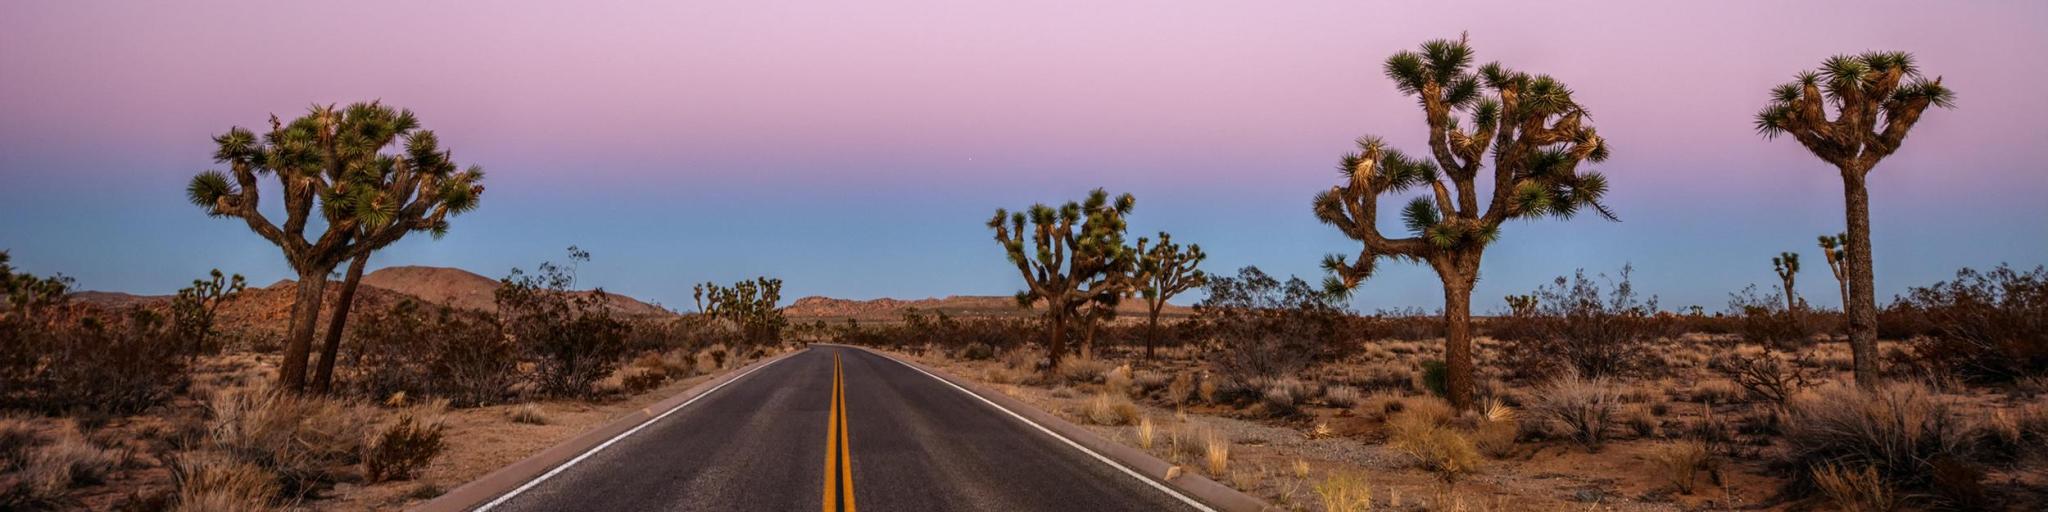 Road driving through the desert near Joshua Tree National Park in California at sunset, with a purple sky